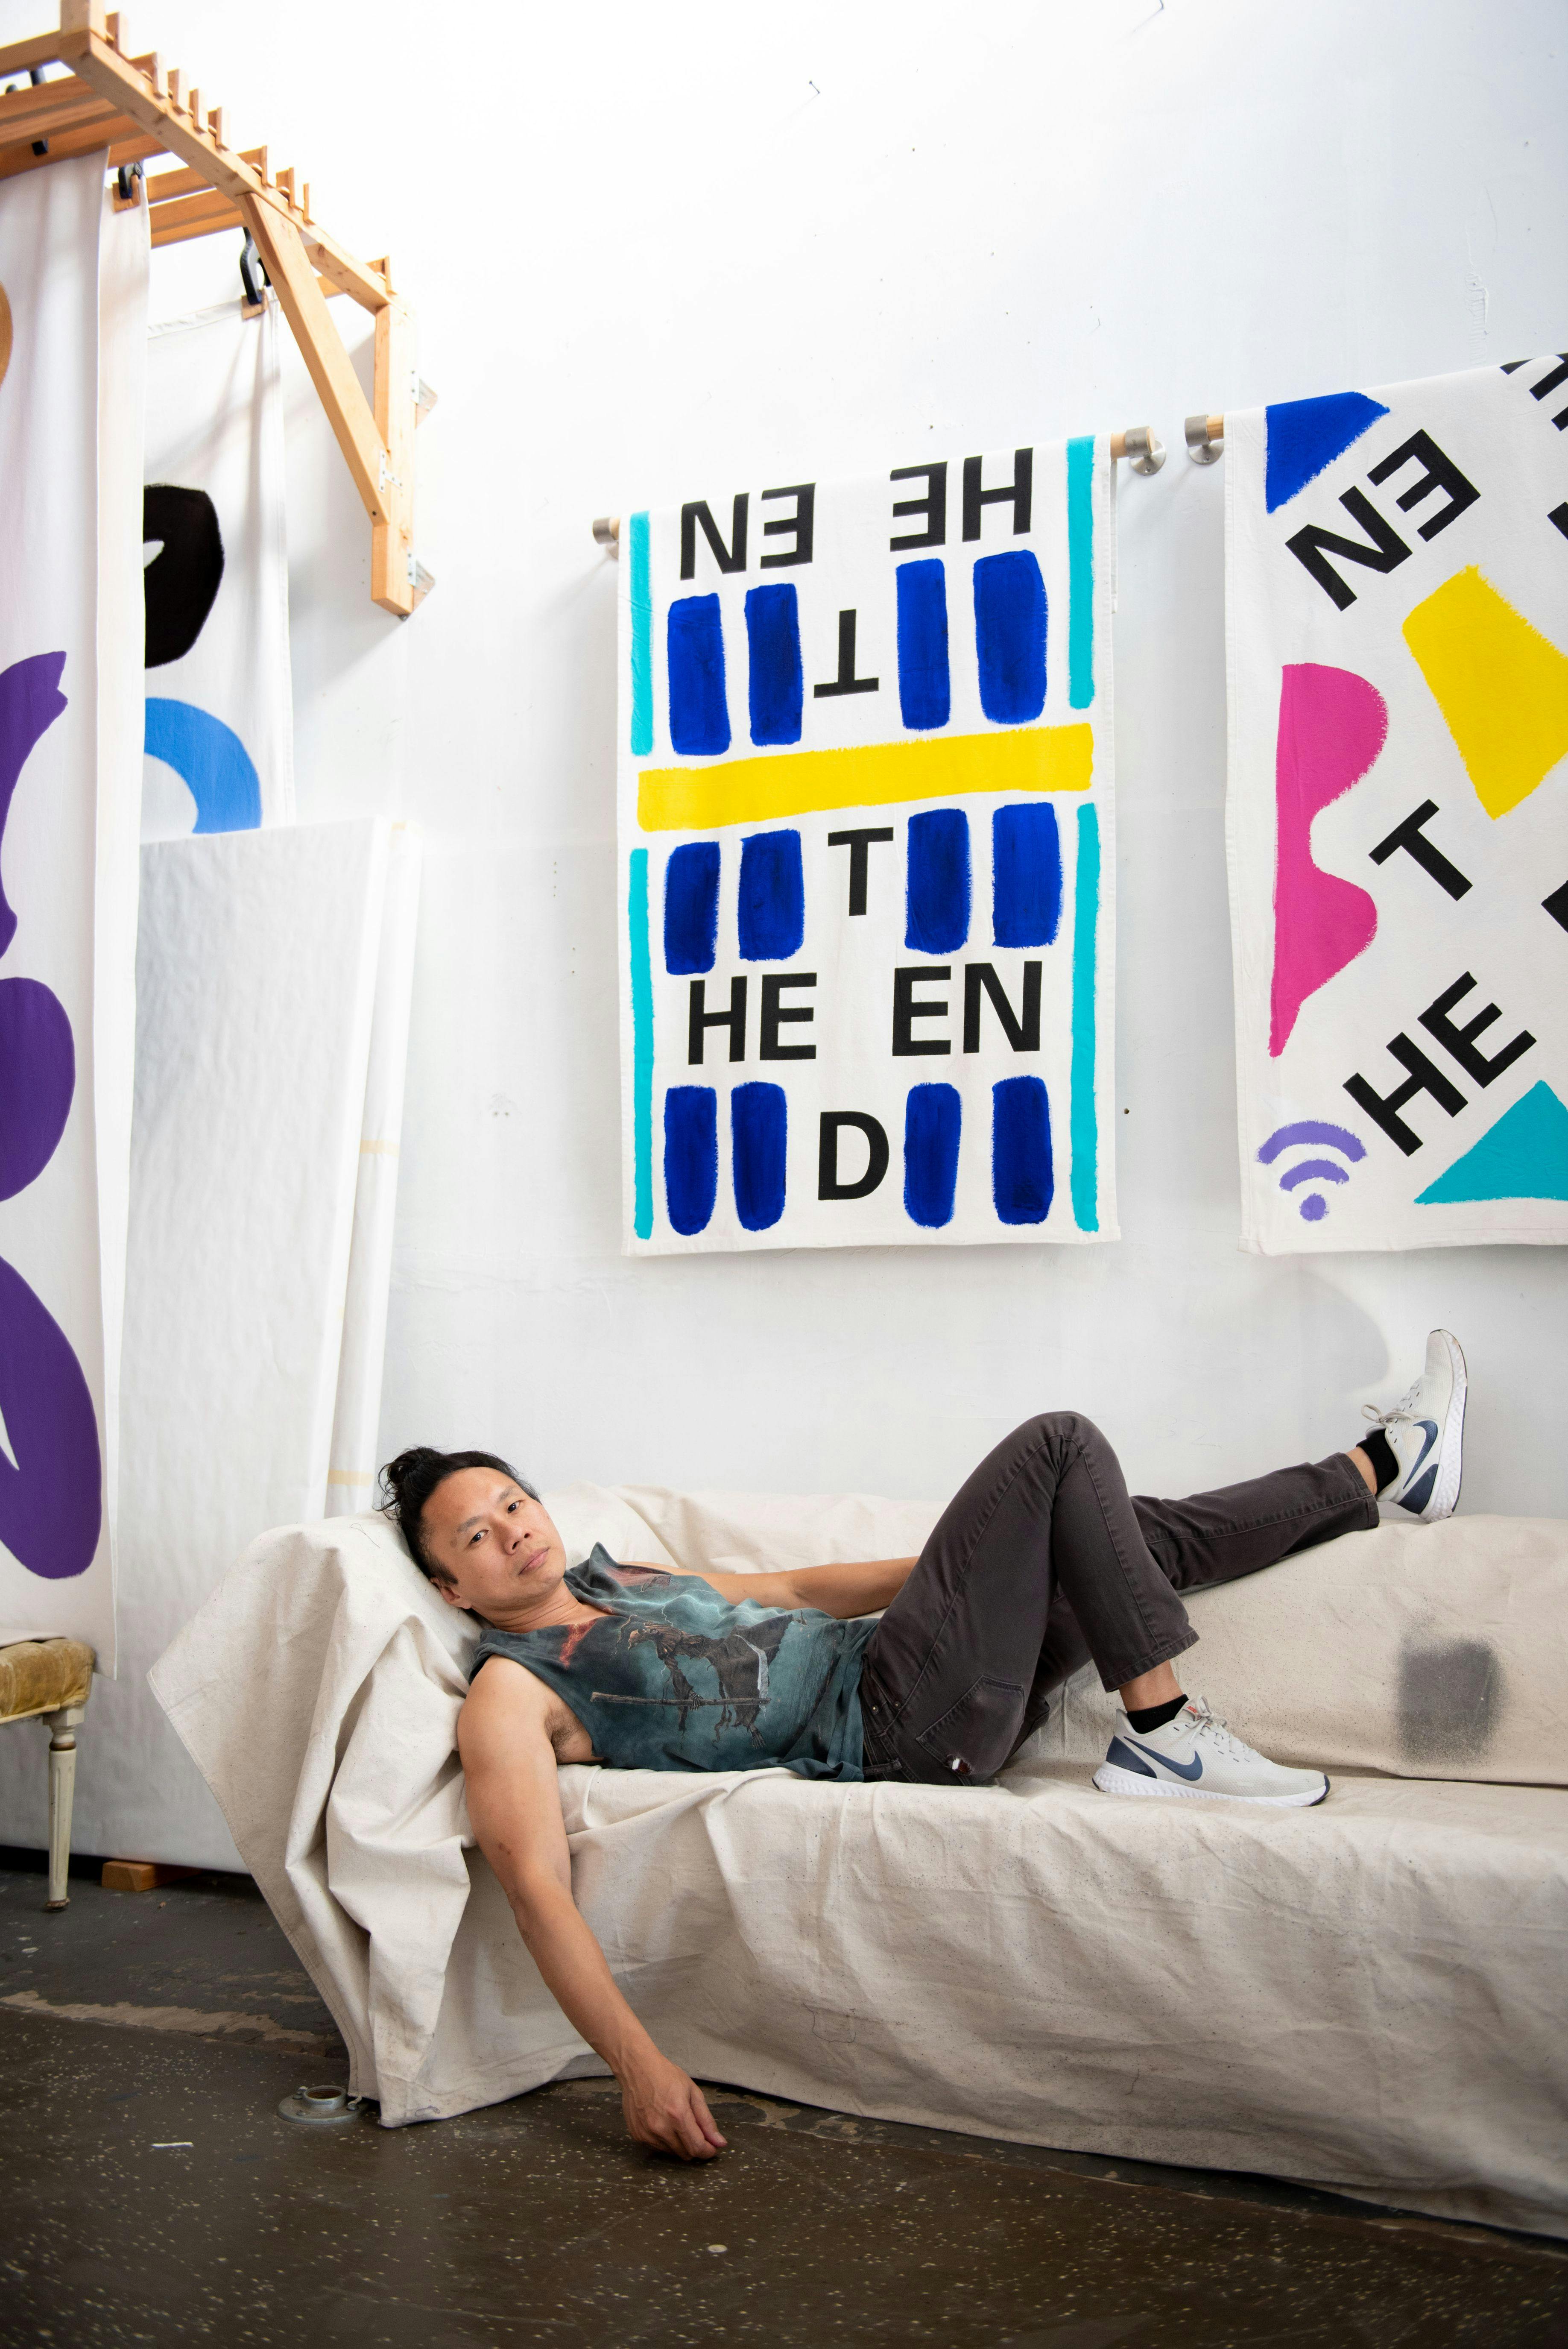 An Asian man wearing black jeans, a graphic teal tank top, and Nikes lies sprawled out on a canvas-covered couch, looking at the camera. Above and behind him are paintings of brightly colored, graphic shapes and letters.